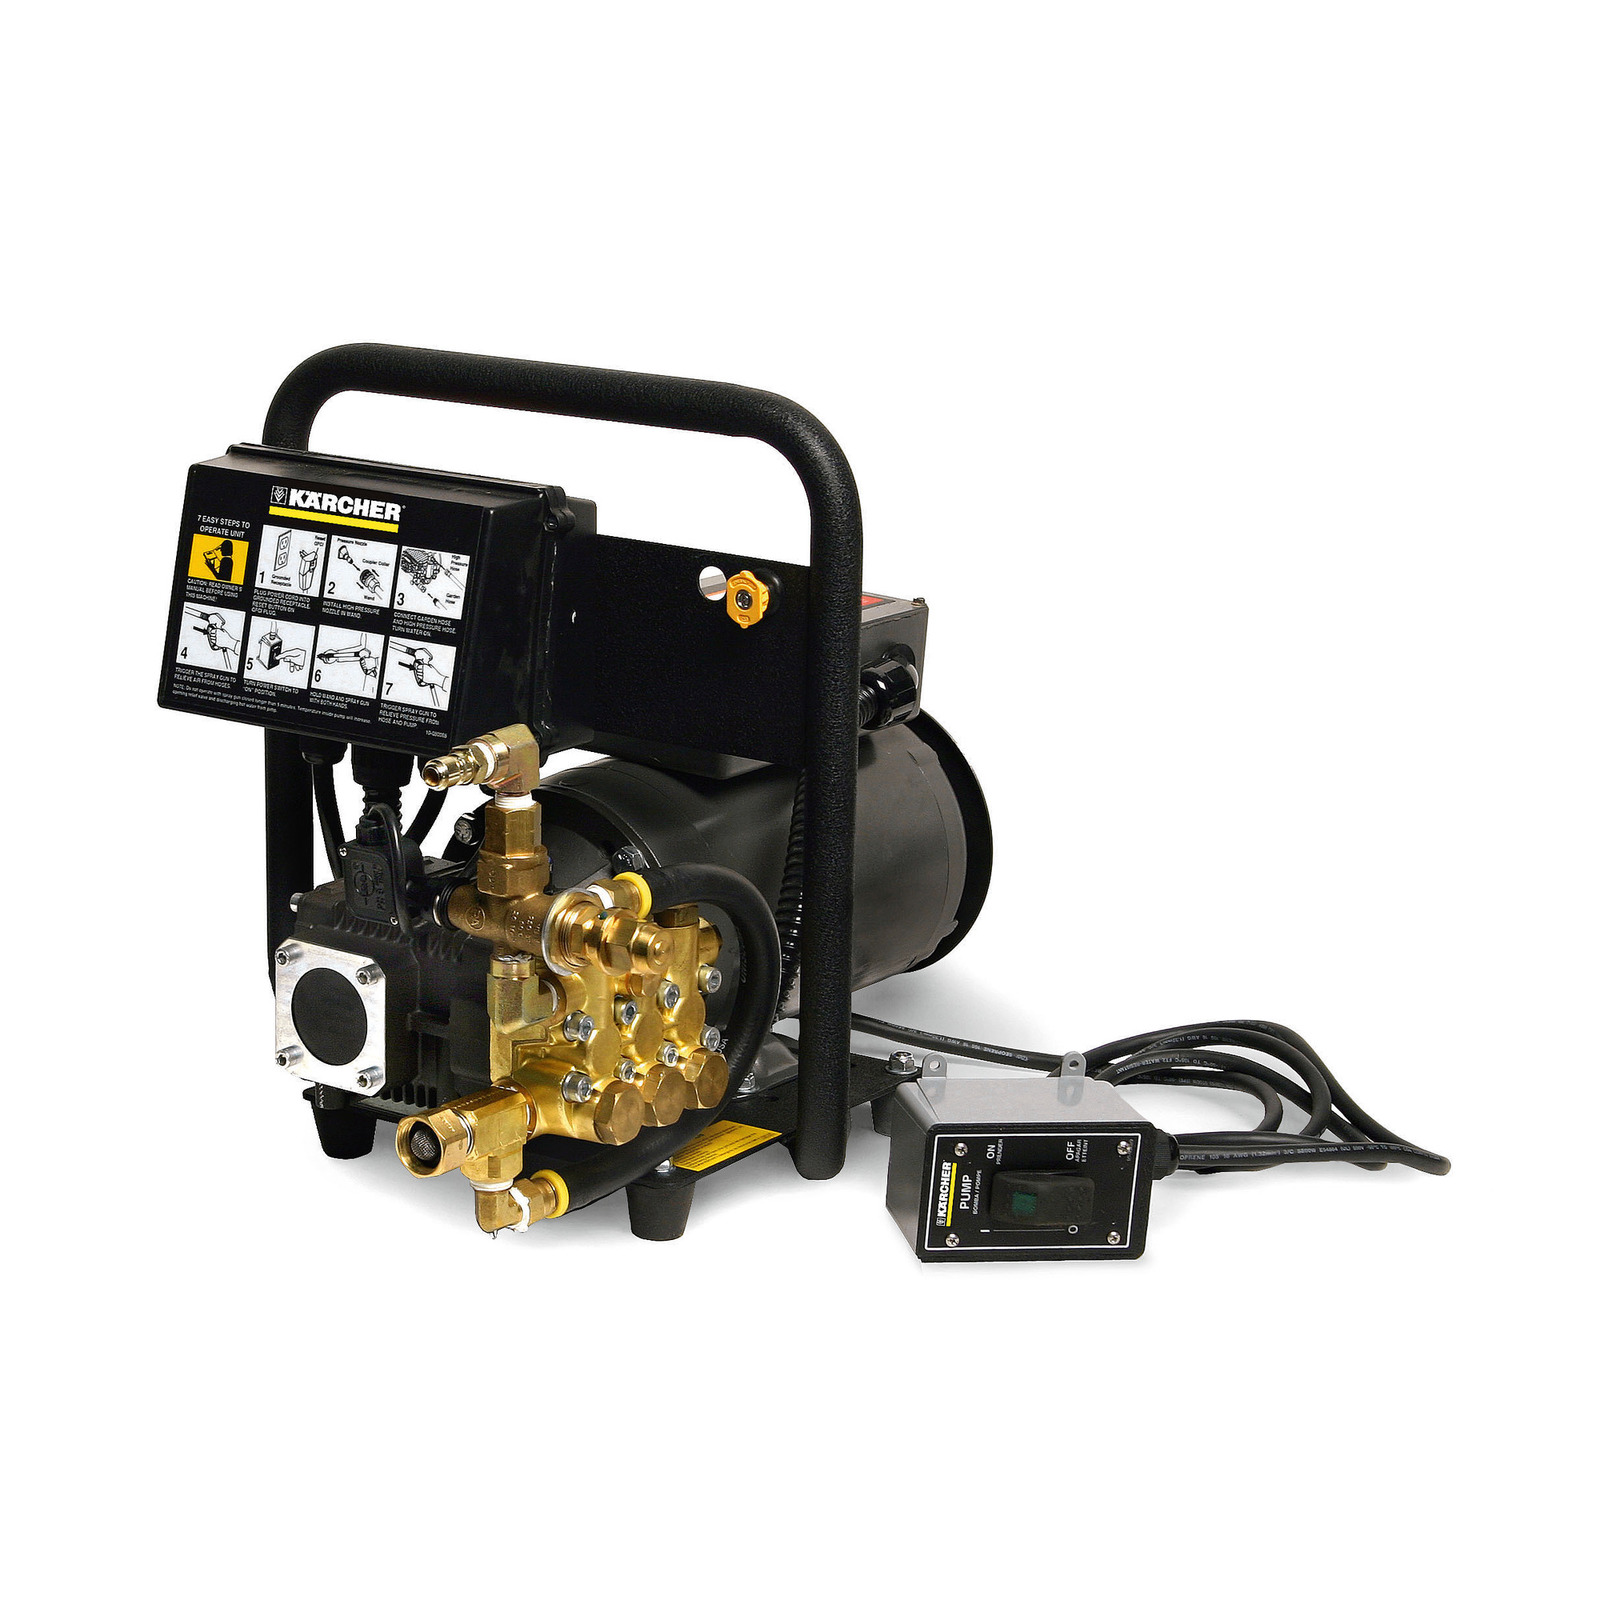 Karcher HD Wall Mounted Series Pressure Washers karcher, hd, 1.8/13 c, pressure, washer, wash, cold-water, professional, commercial, powerful, electric, portable, cleaning, clean, 